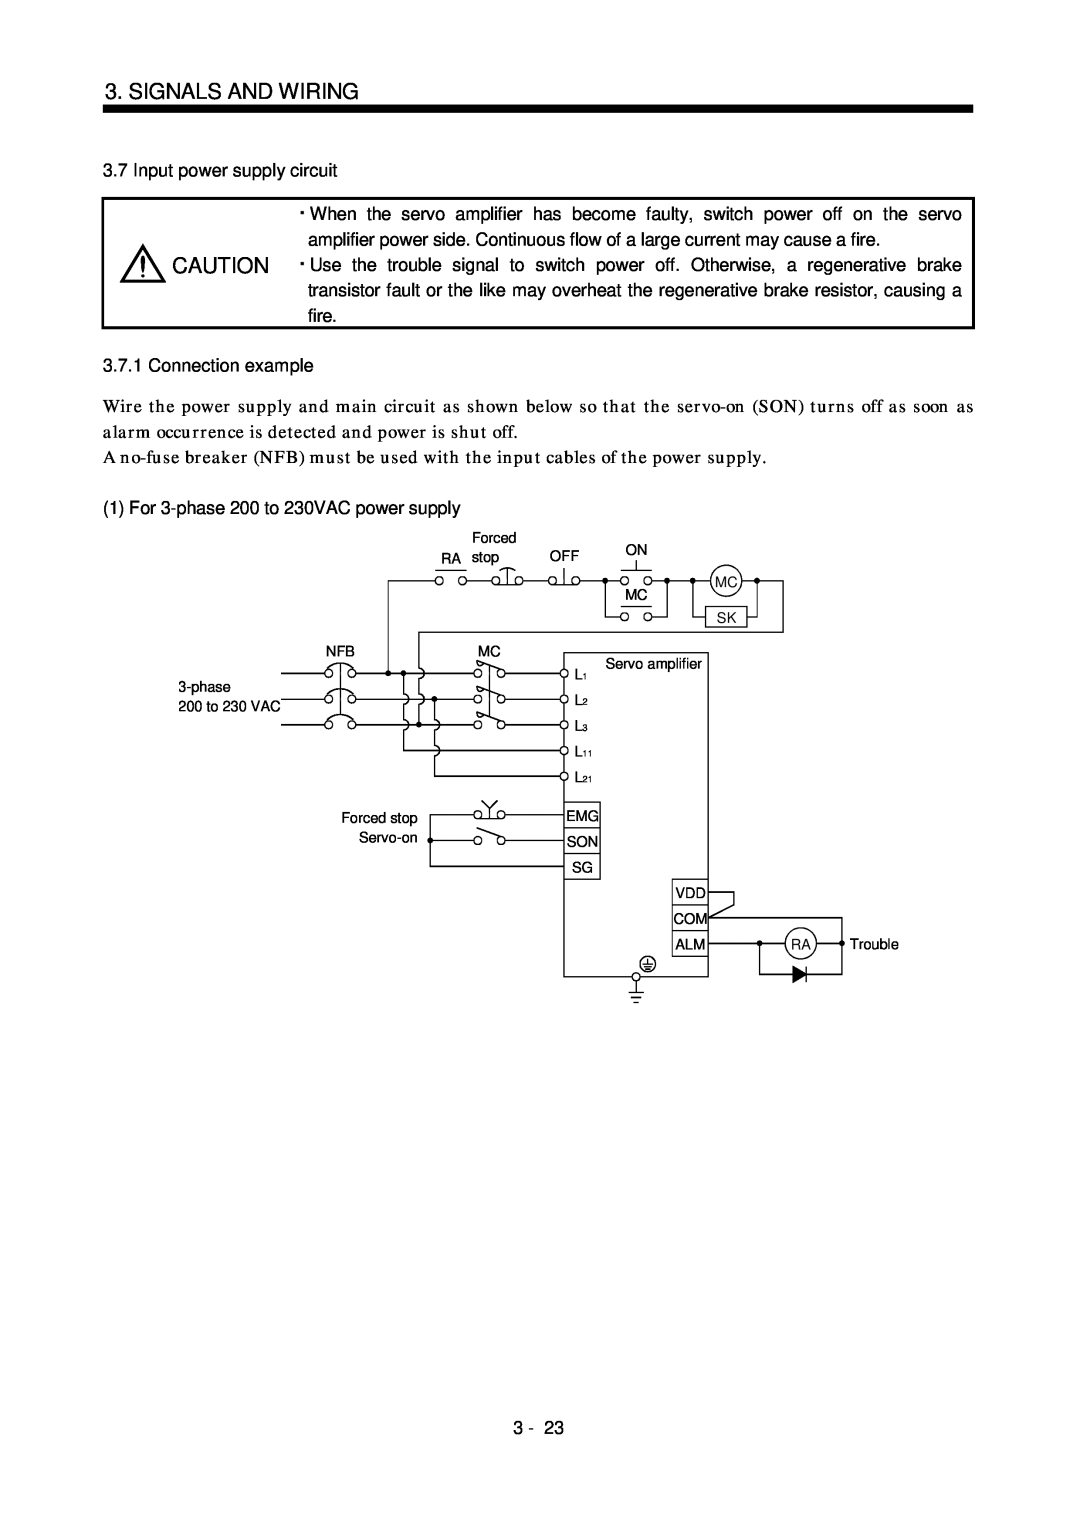 Mitsubishi Electronics MR-J2S- CL specifications Input power supply circuit, Signals And Wiring 